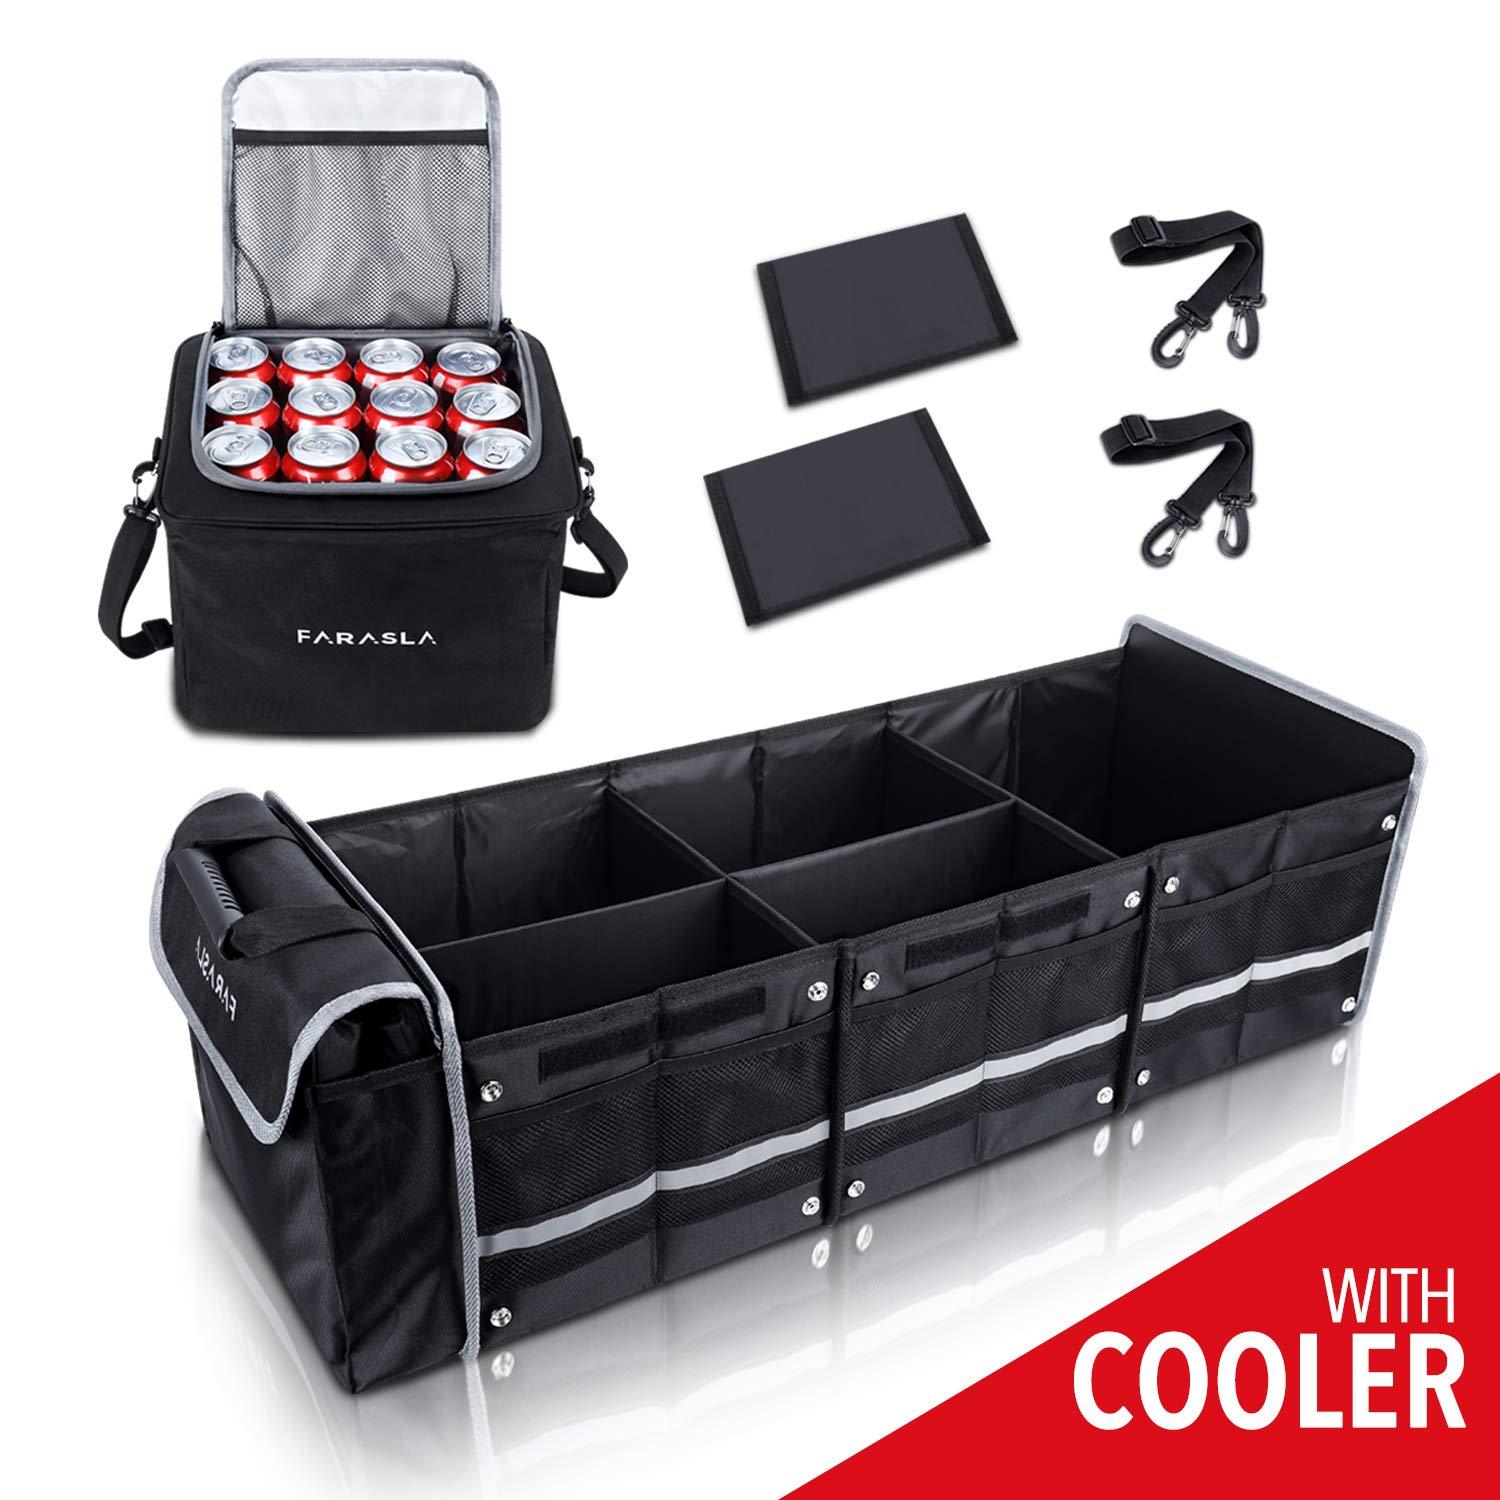 Trunk Organizer for Groceries | Large Collapsible Box | meori